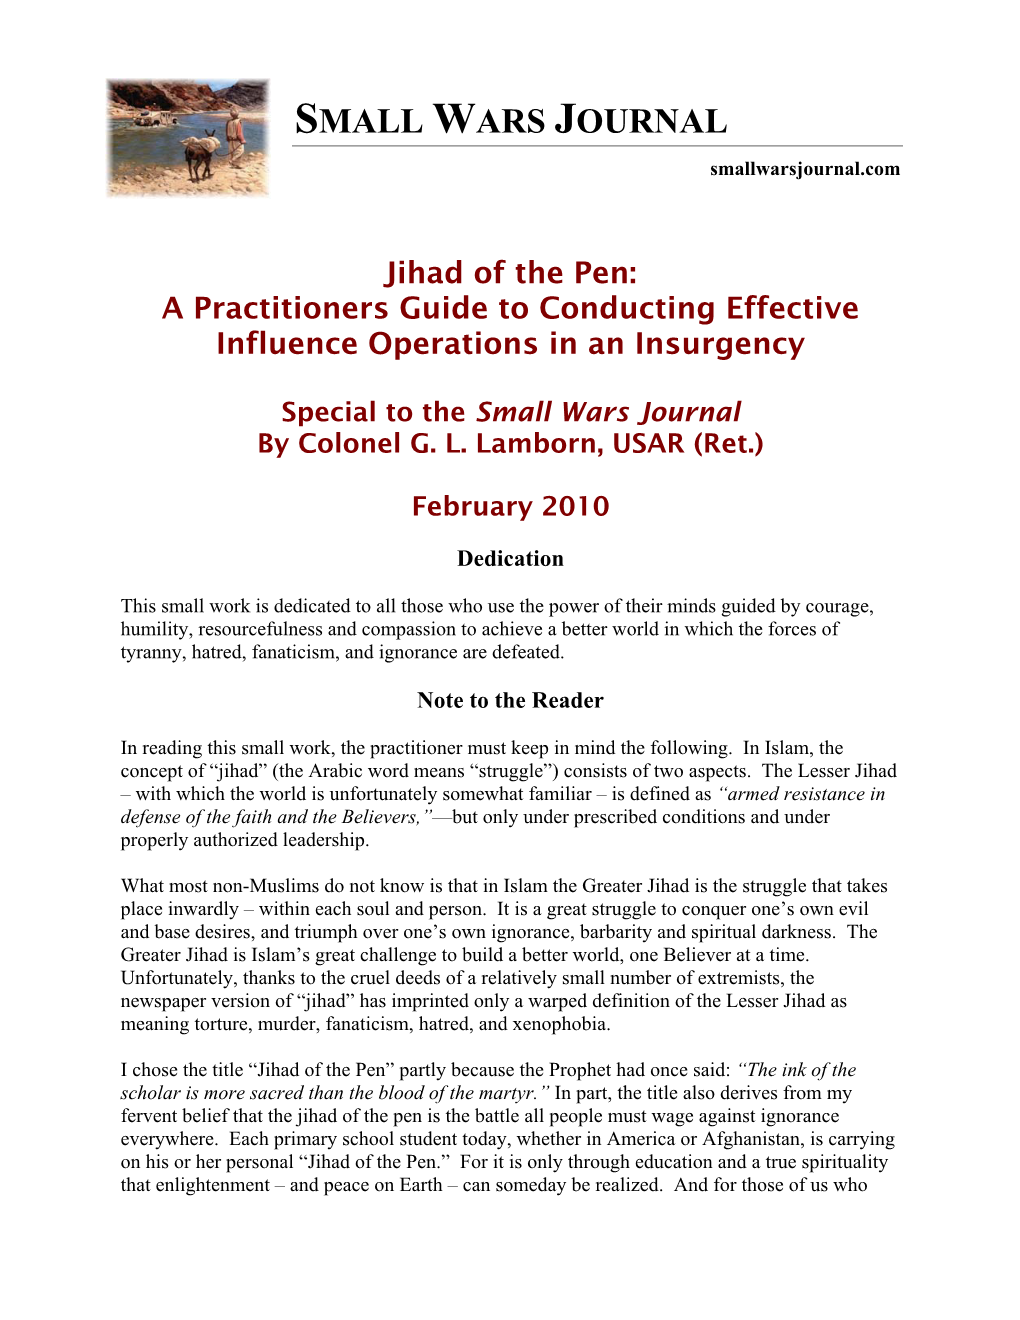 Jihad of the Pen: a Practitioners Guide to Conducting Effective Influence Operations in an Insurgency